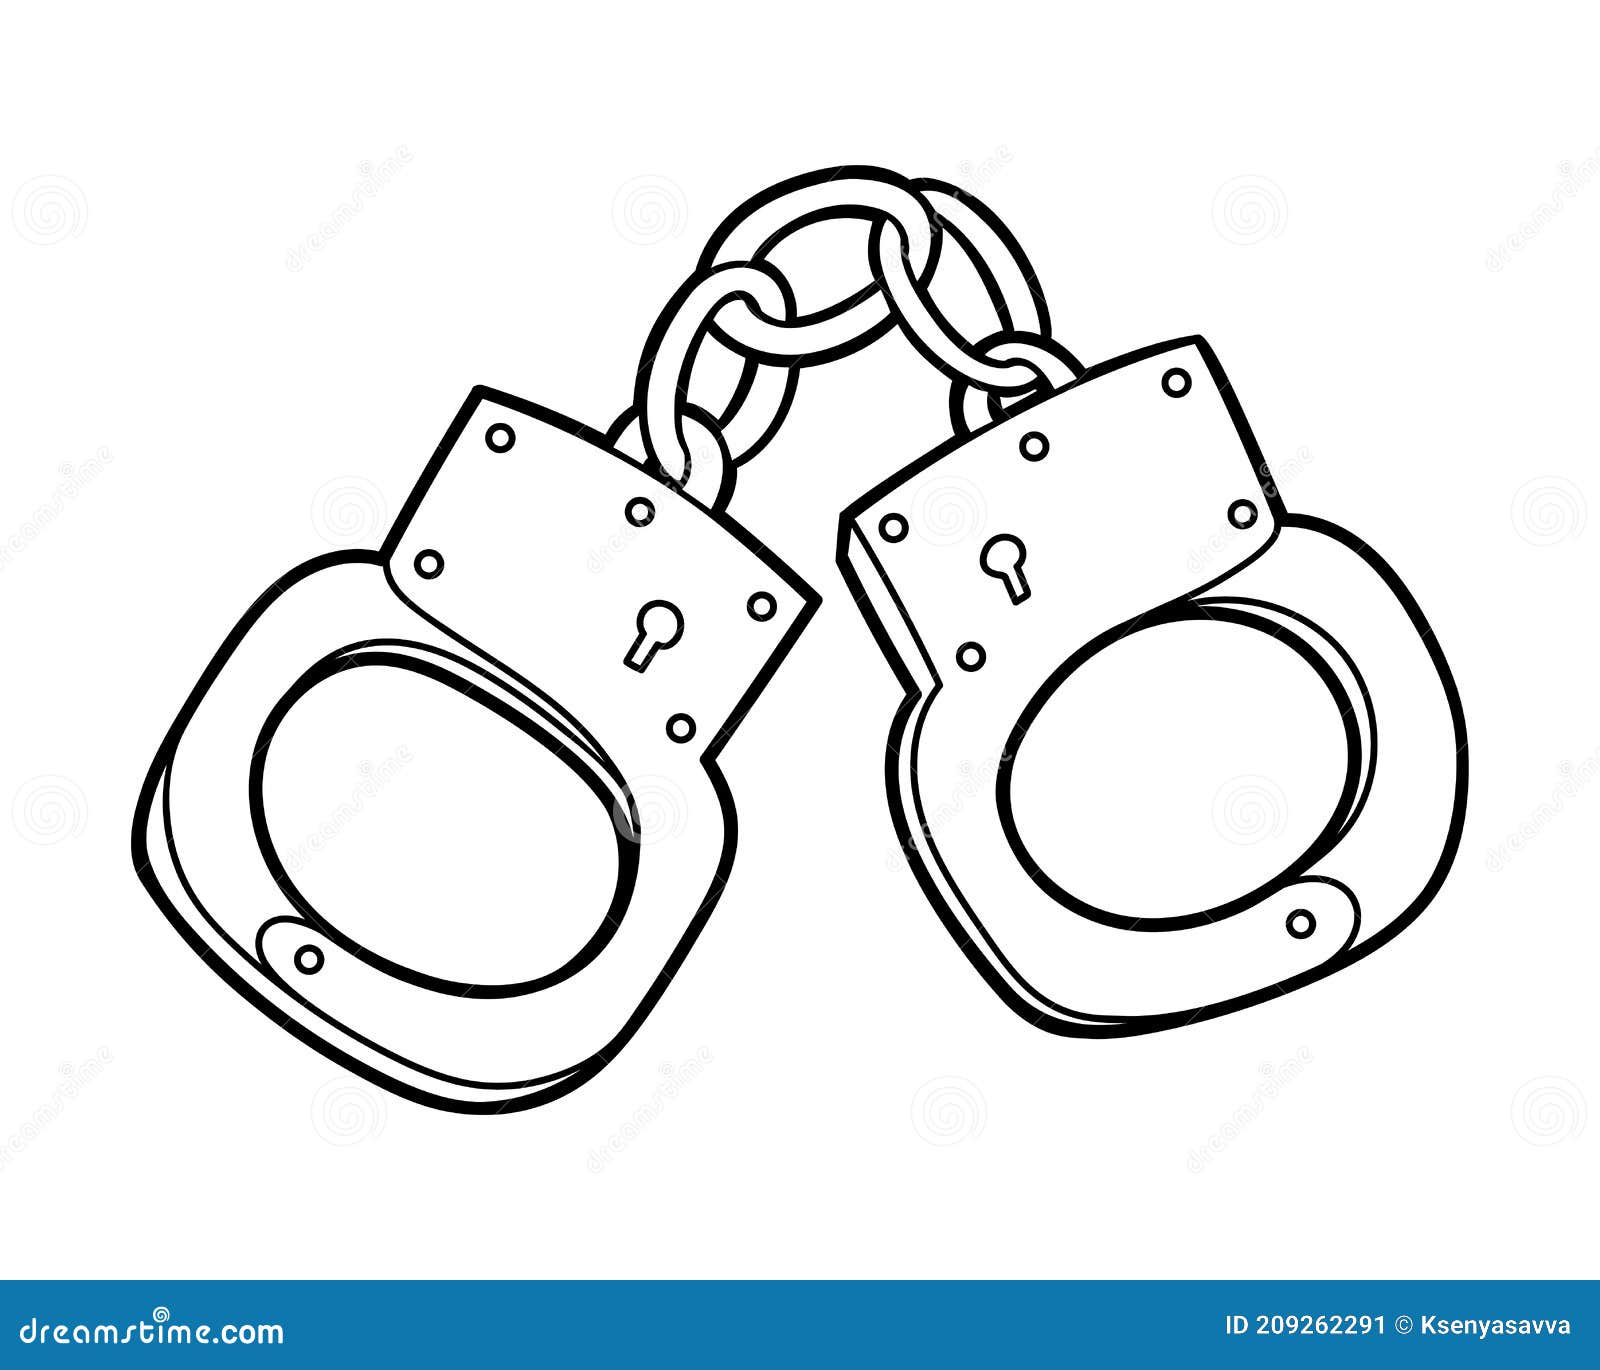 Handcuffs Coloring Page